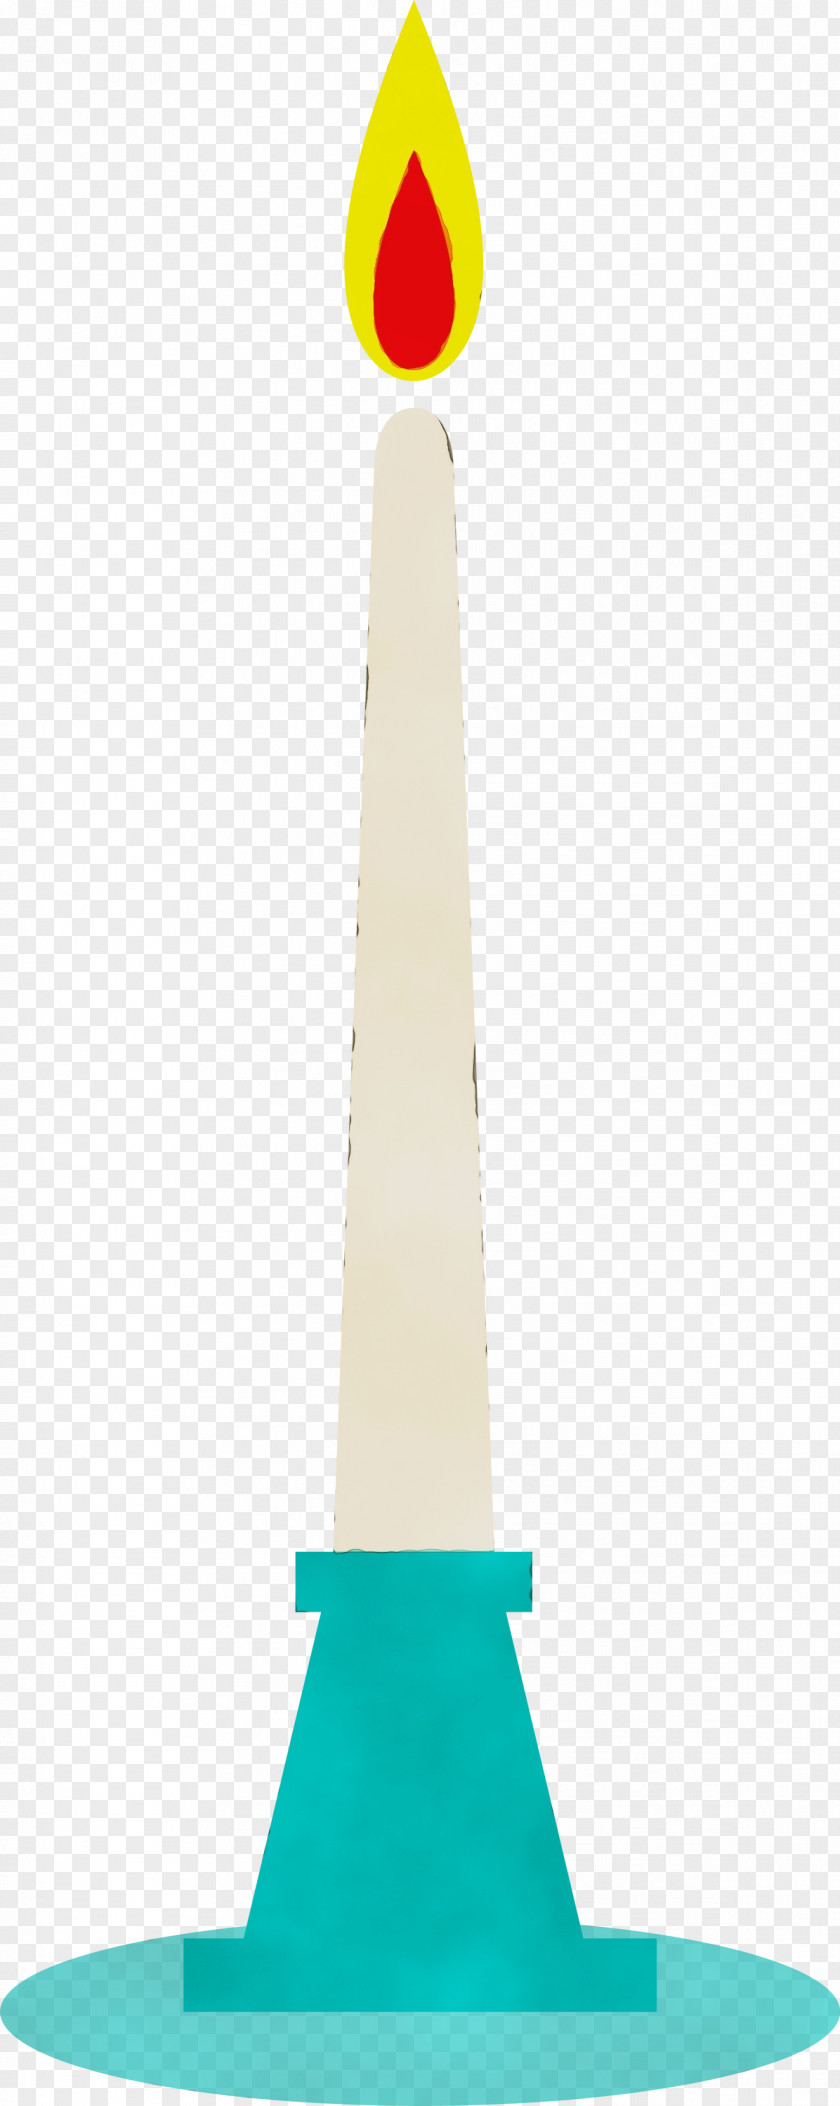 Teal Cone PNG